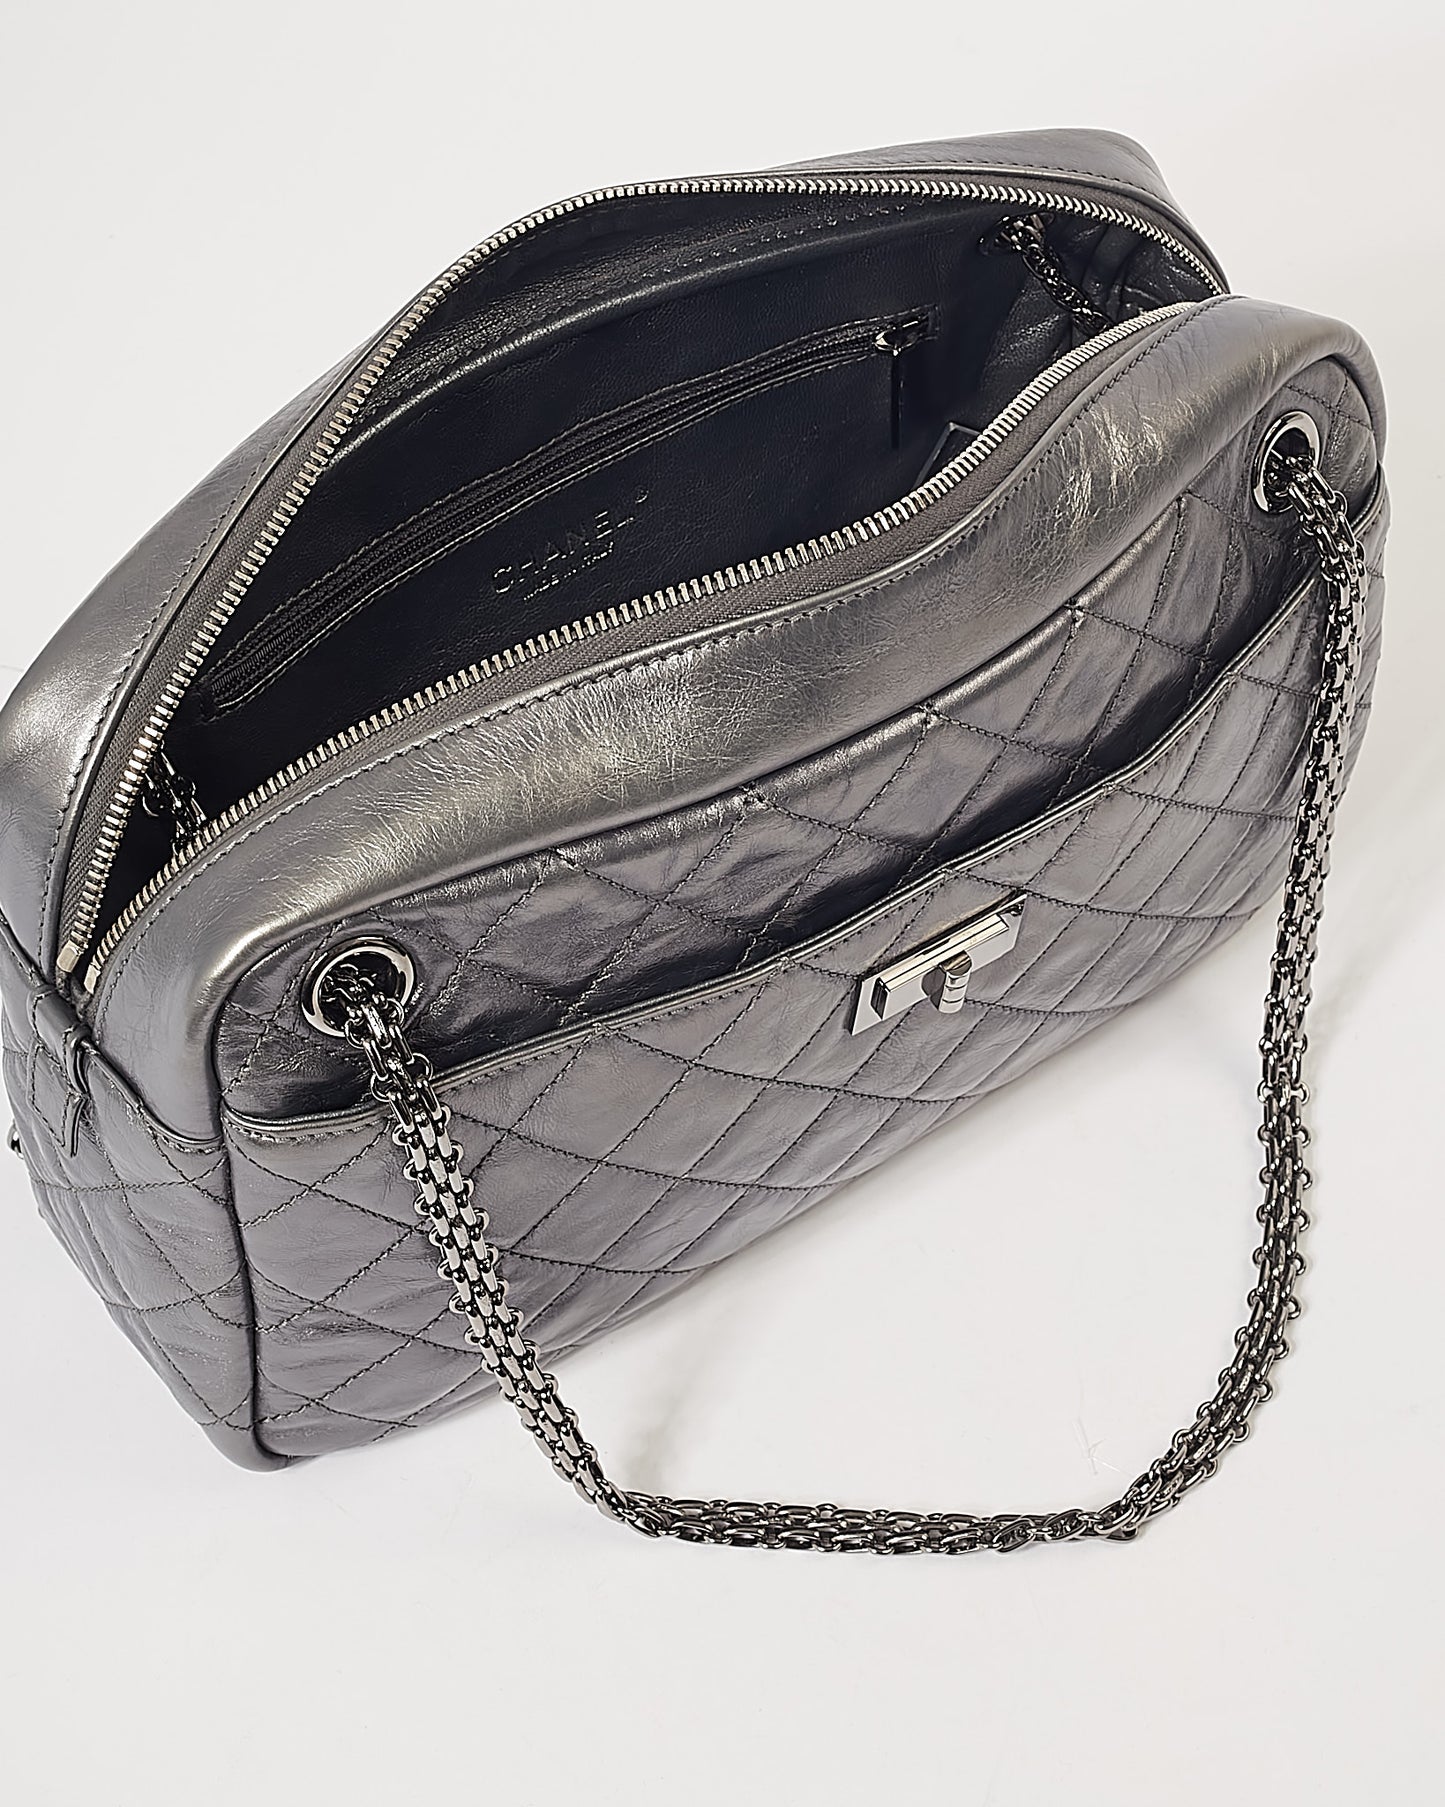 Chanel Dark Silver Leather Large Reissue Camera bag